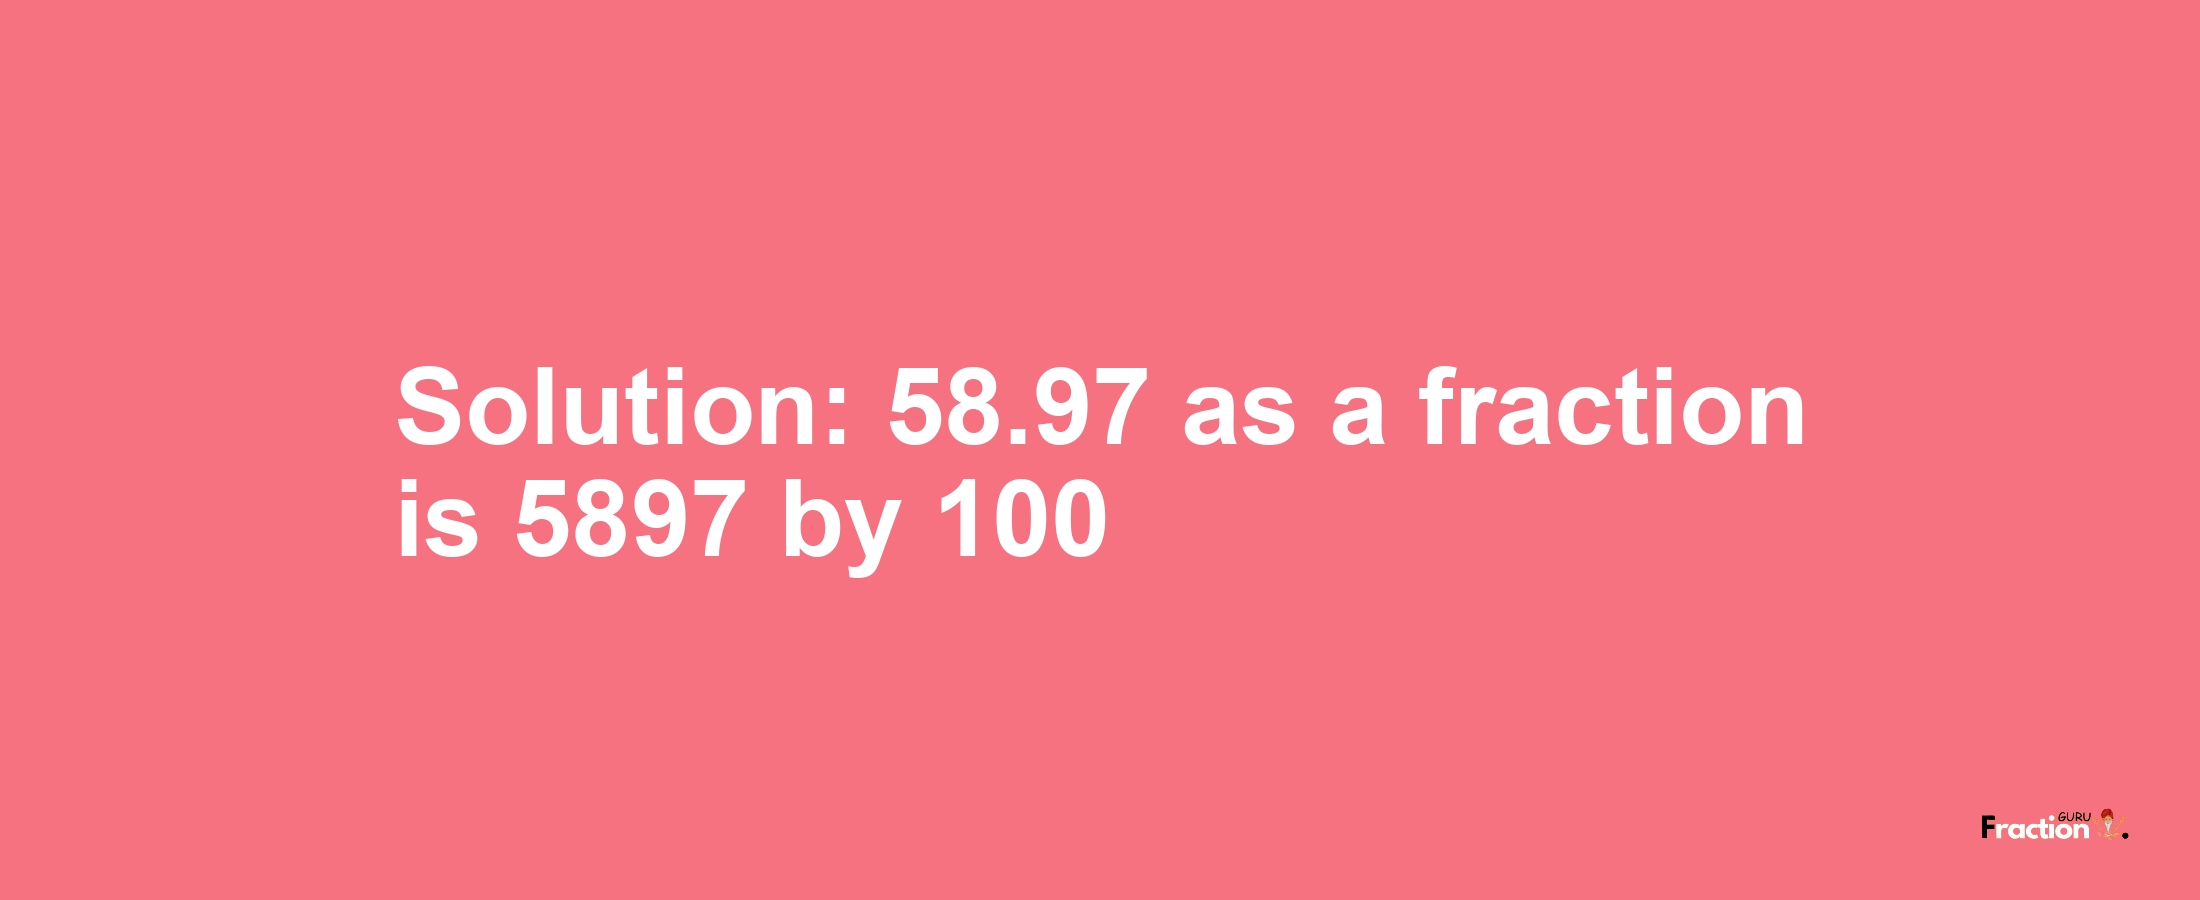 Solution:58.97 as a fraction is 5897/100